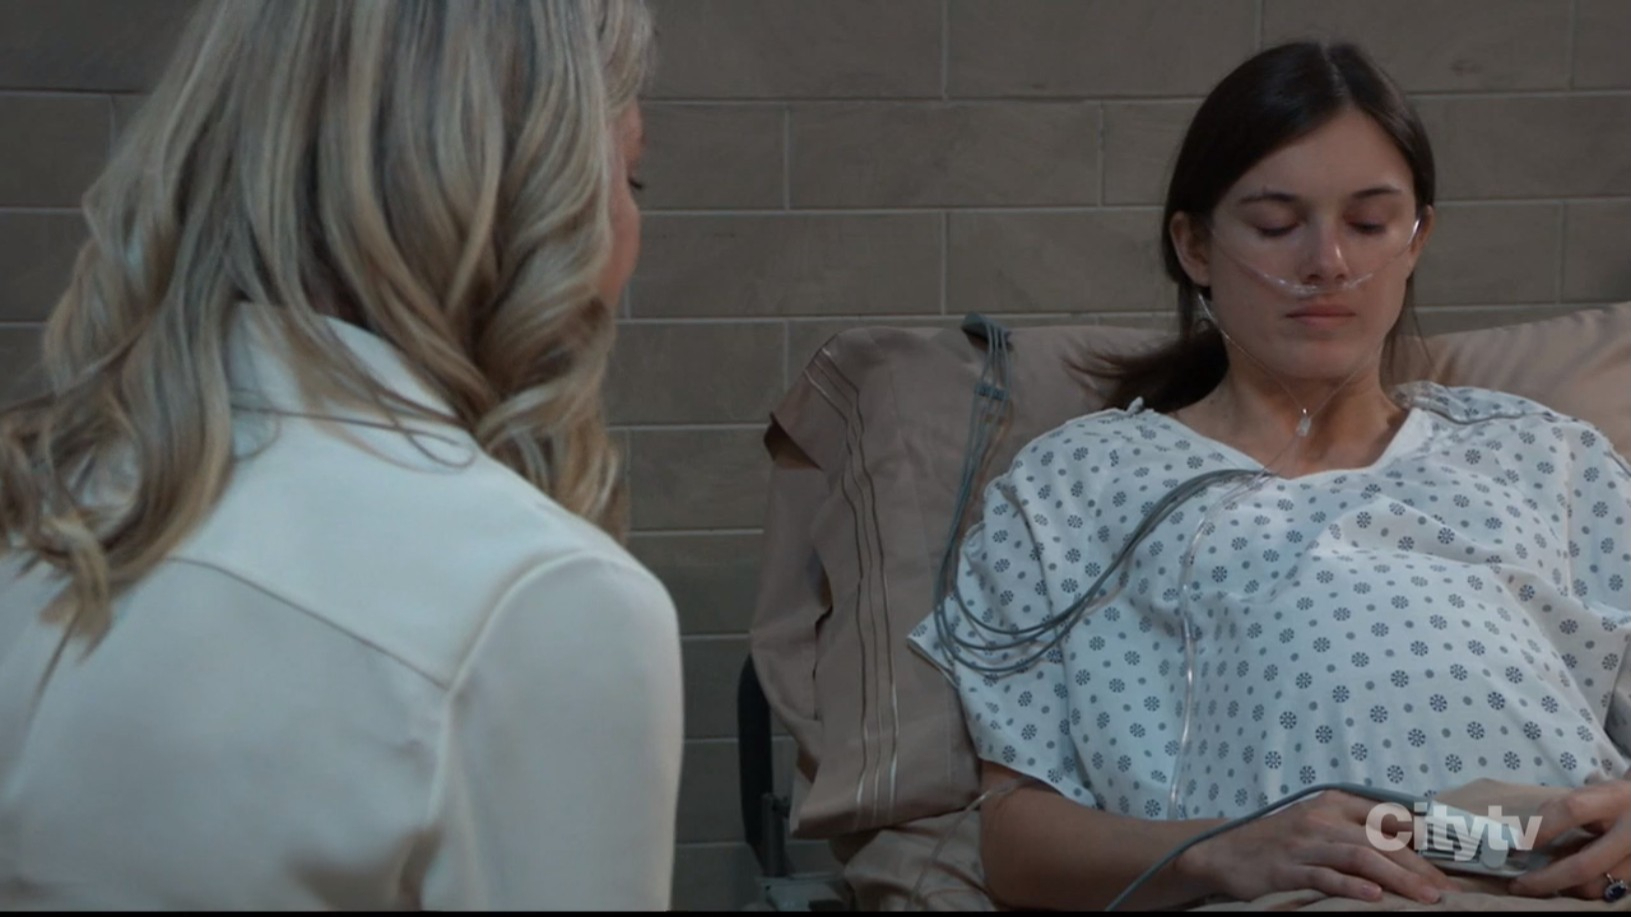 willow's fake pregnancy belly migrates GH recaps SoapsSpoilers